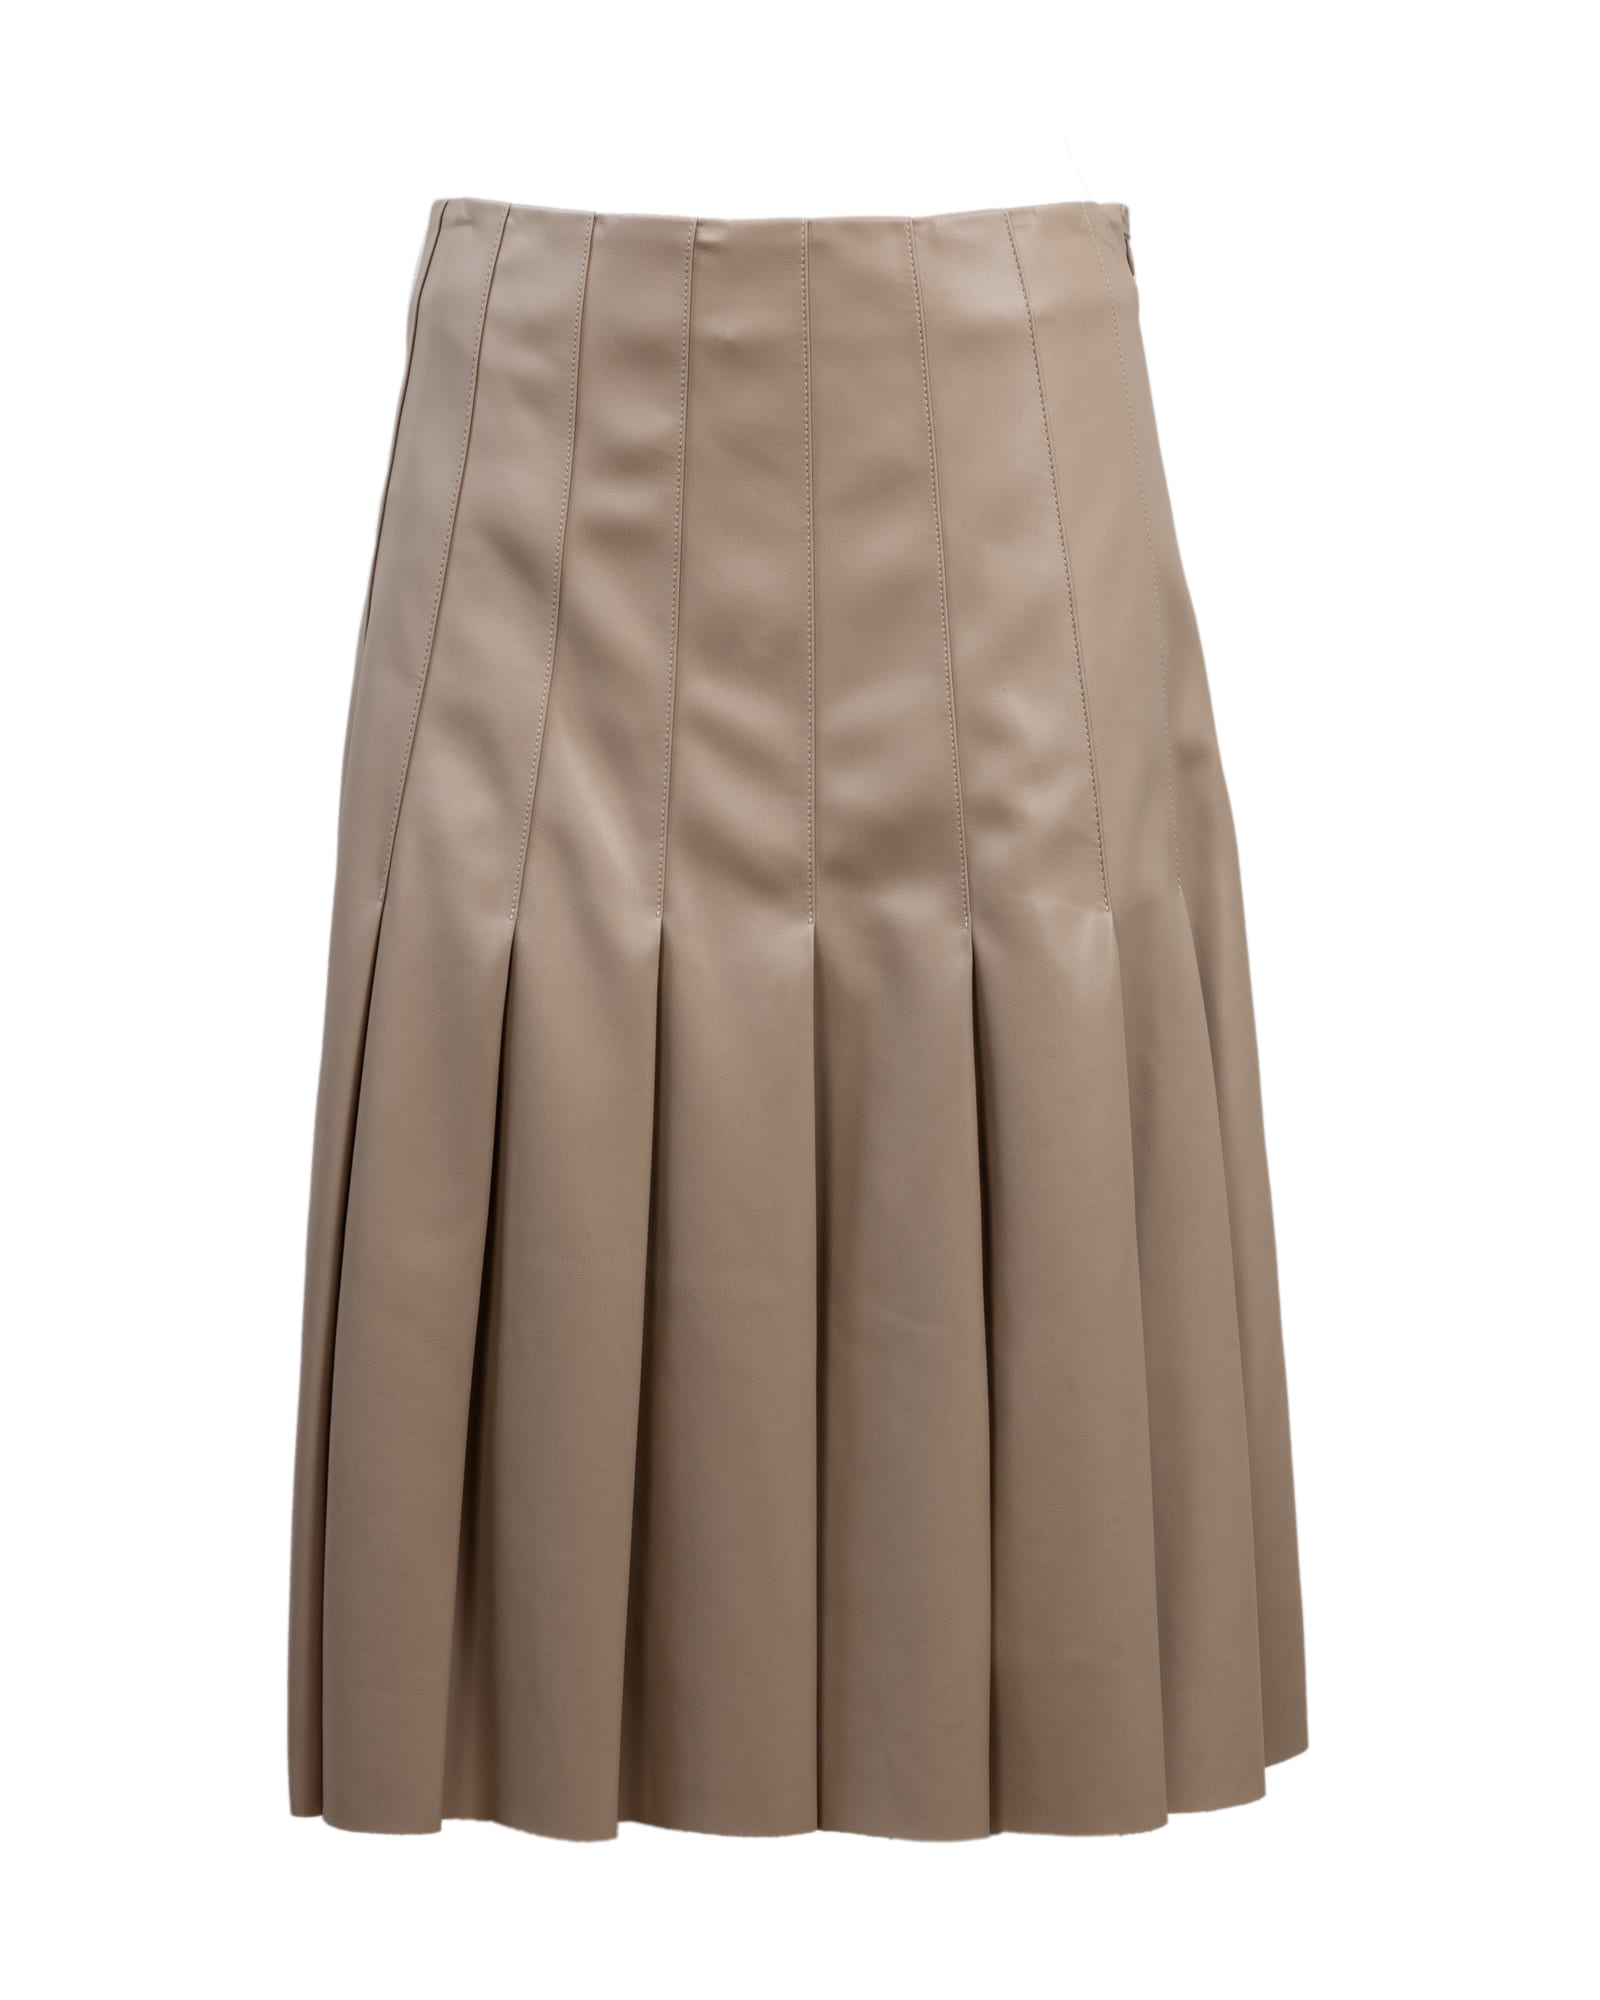 Karl Lagerfeld pleated faux leather skirt